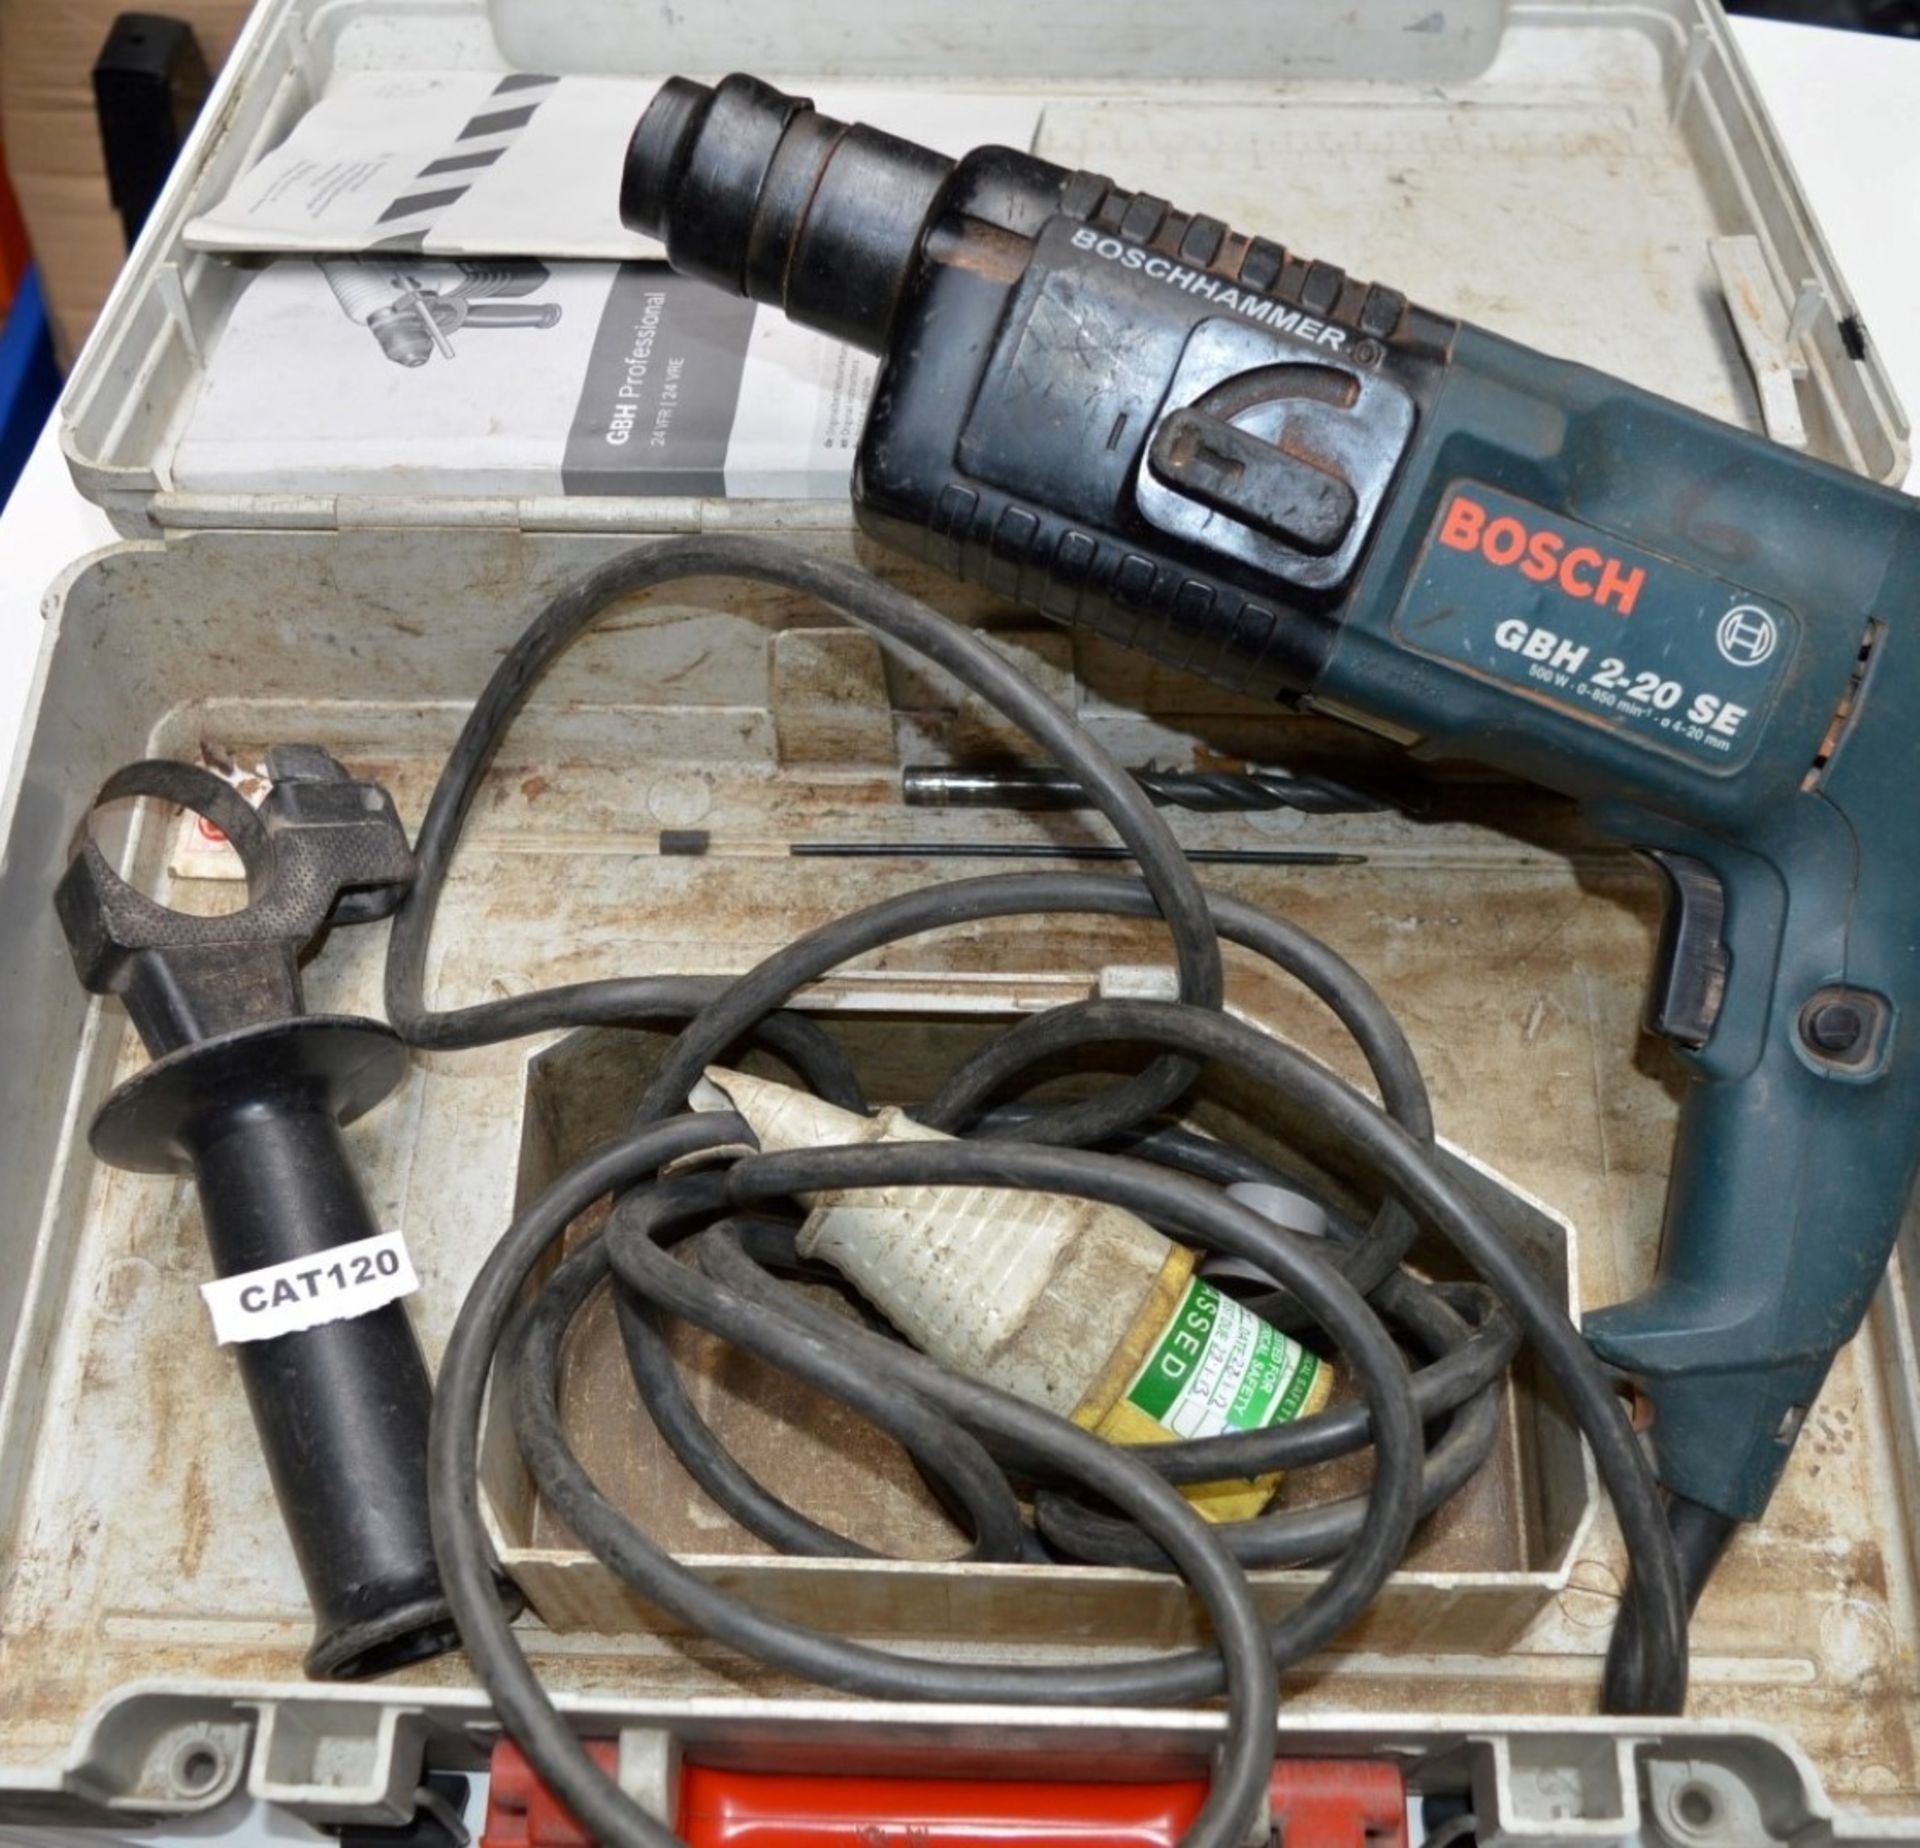 1 x Bosch Rotary Hammer Drill - 110v - Model GBH 2 SE - Includes Protective Case - Tested and